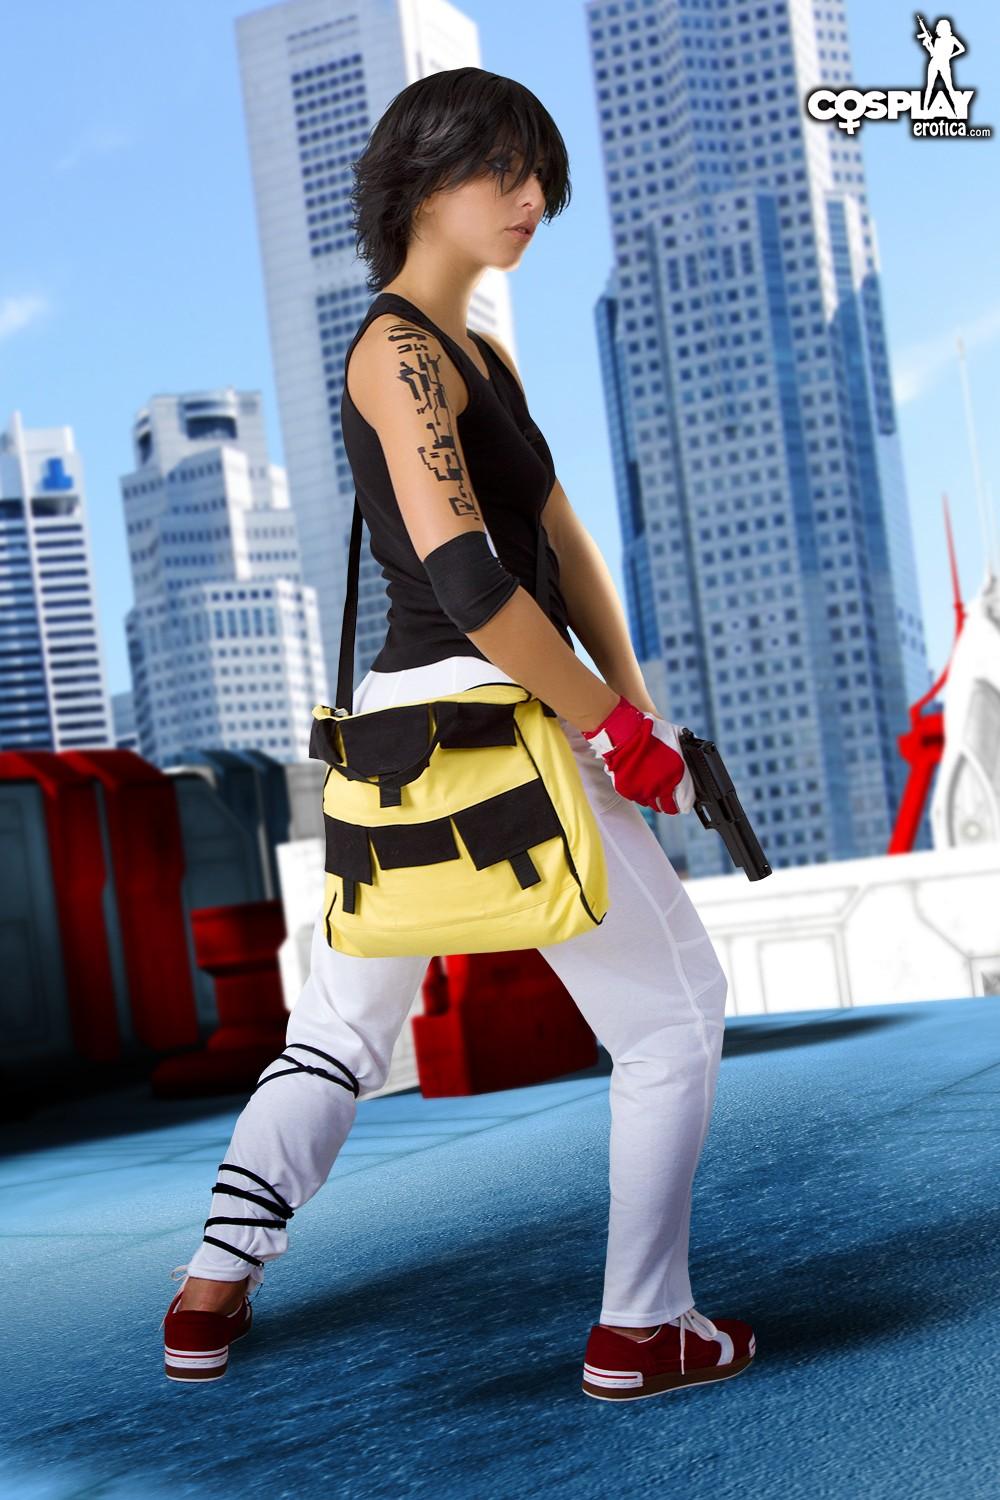 Sexy cosplay girl Anne poses as Faith from Mirror's Edge #53248529